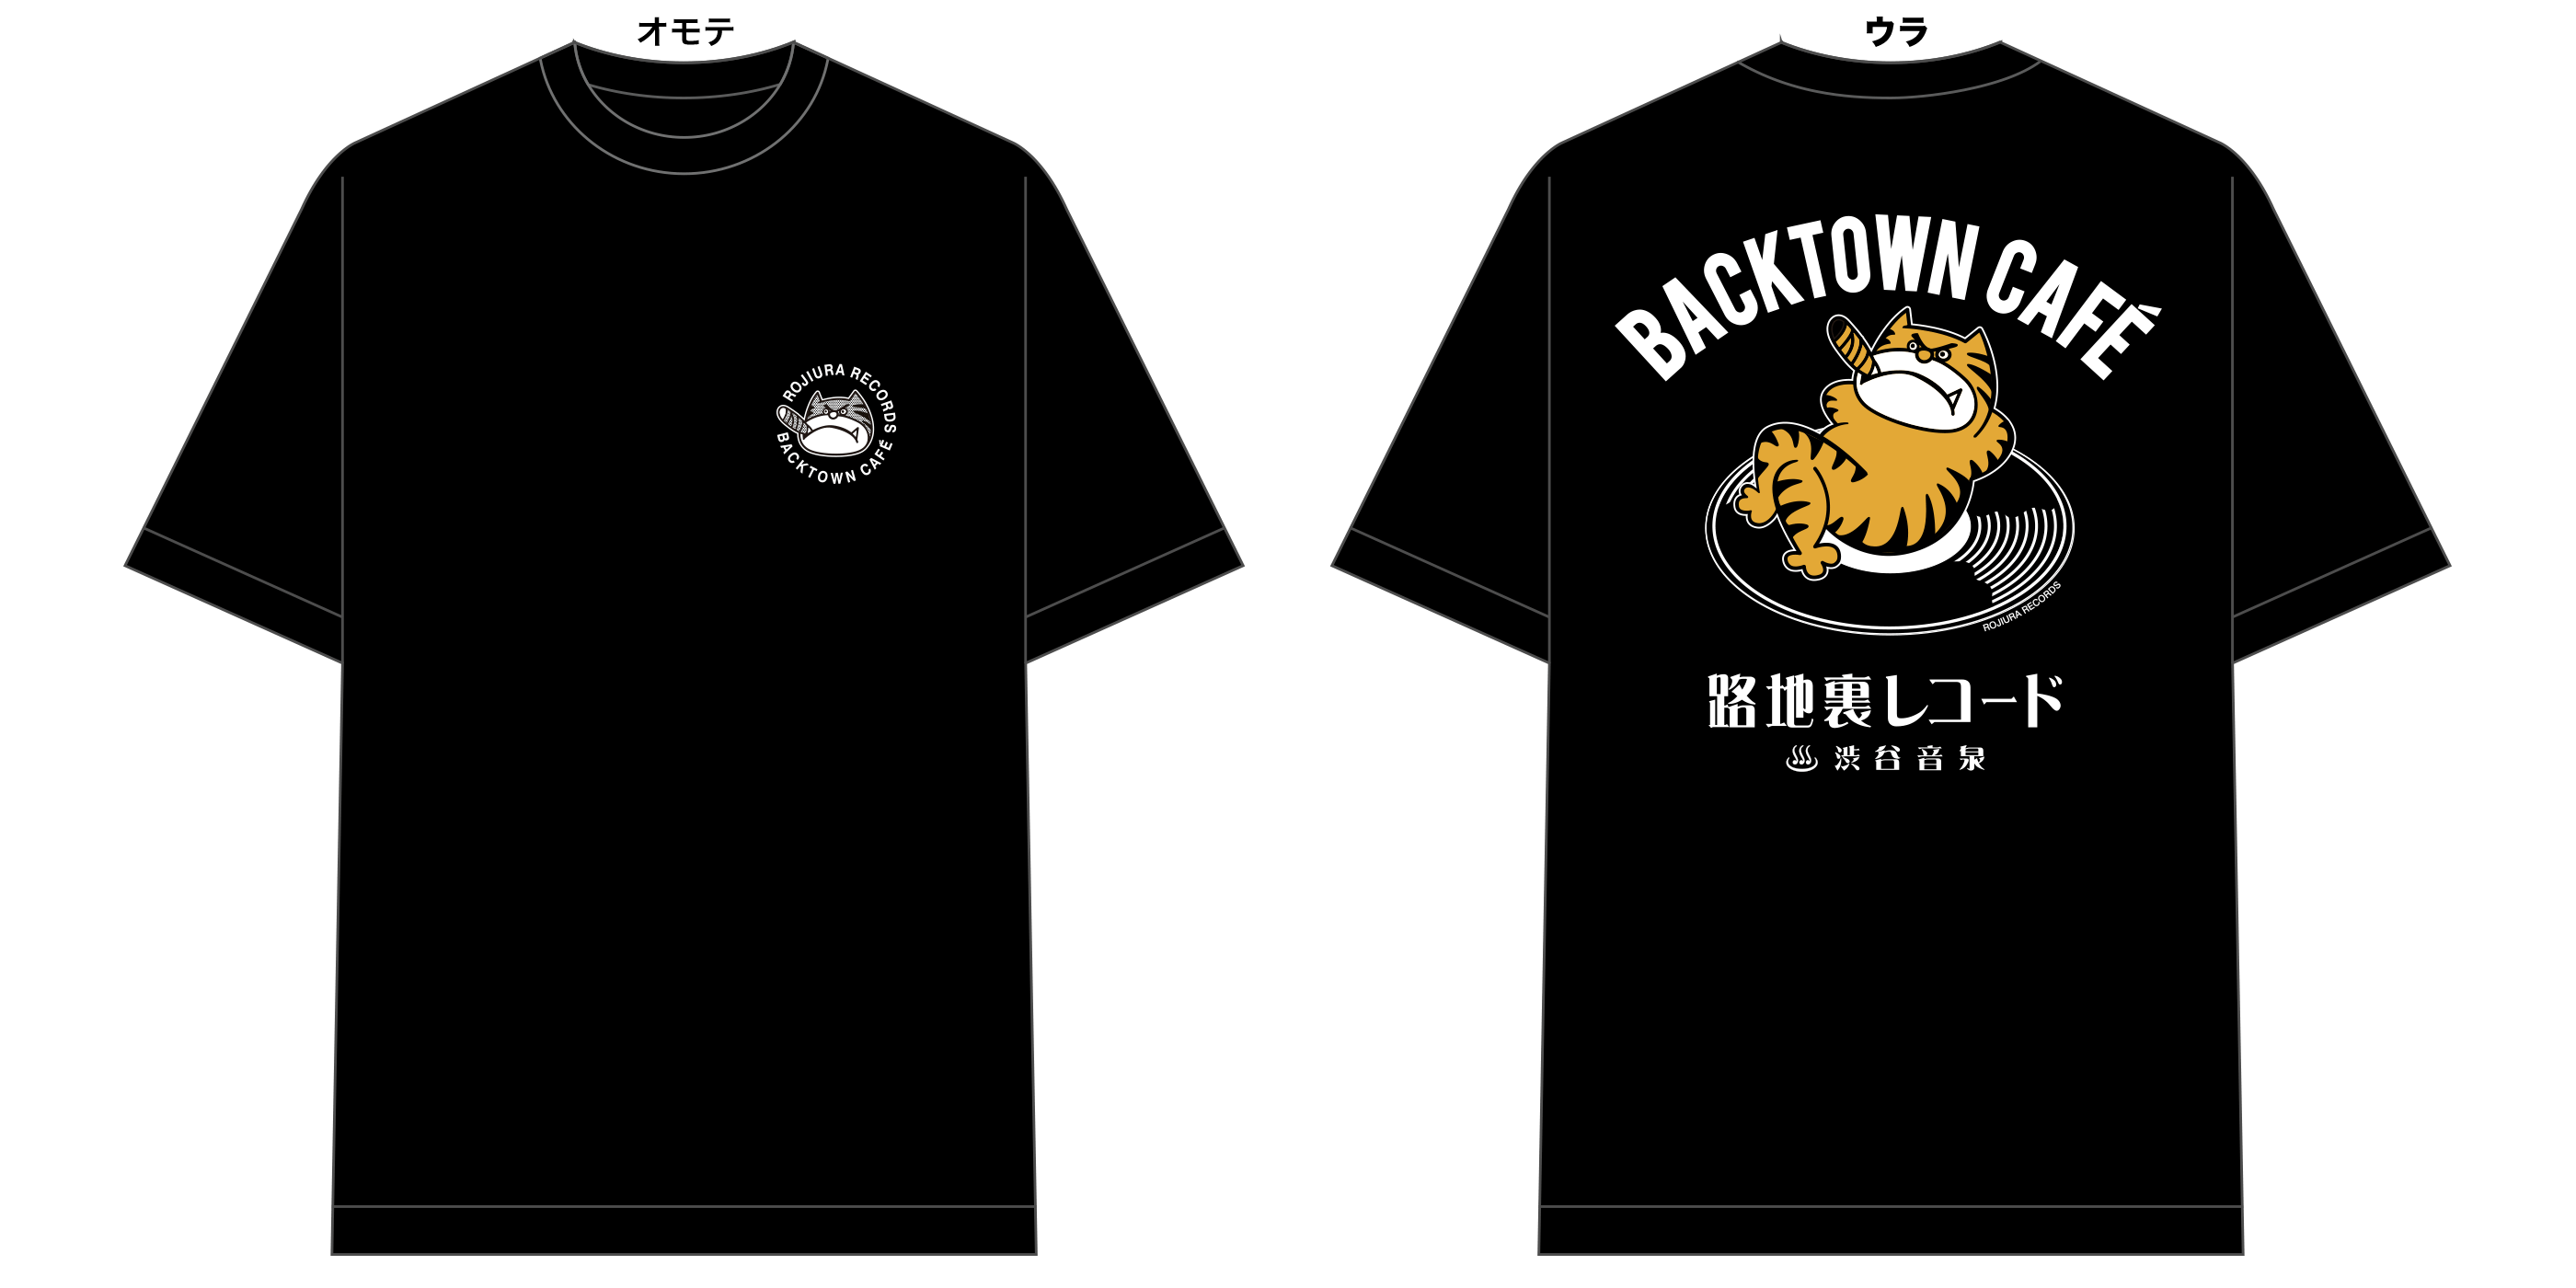 Save The Backtown Cafe Campfire キャンプファイヤー